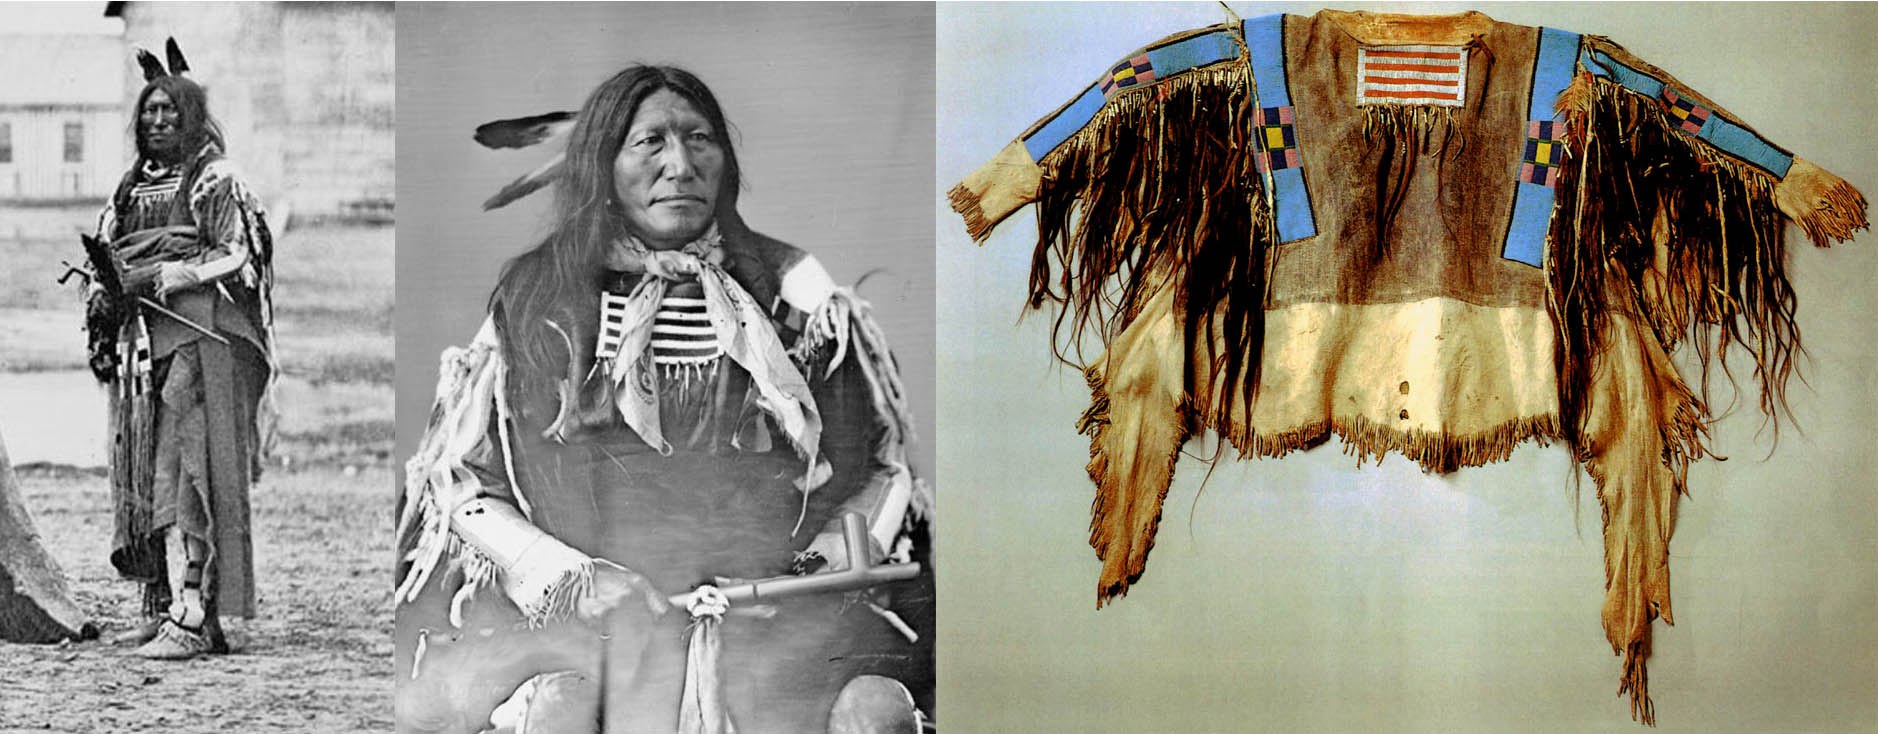 Slow Bull was an Oglala Lakota chief, who, along with Red Cloud, signed the Fort Laramie Treaty in 1868. In the photograph on the left, which was taken by Alexander Gardner to mark the occasion, Slow Bull can be seen wearing a war shirt and leggings, most likely of Crow origin. As can be seen in the middle photograph, he wore the same shirt on other occasions in the 1870's, too. Today, the same shirt look as it does in the photograph on the right. In all likelihood, it was a diplomatic gift from the Crows, as Crow also participated in the Fort Laramie meeting. After all, Crows and Lakotas were traditional enemies at that time.